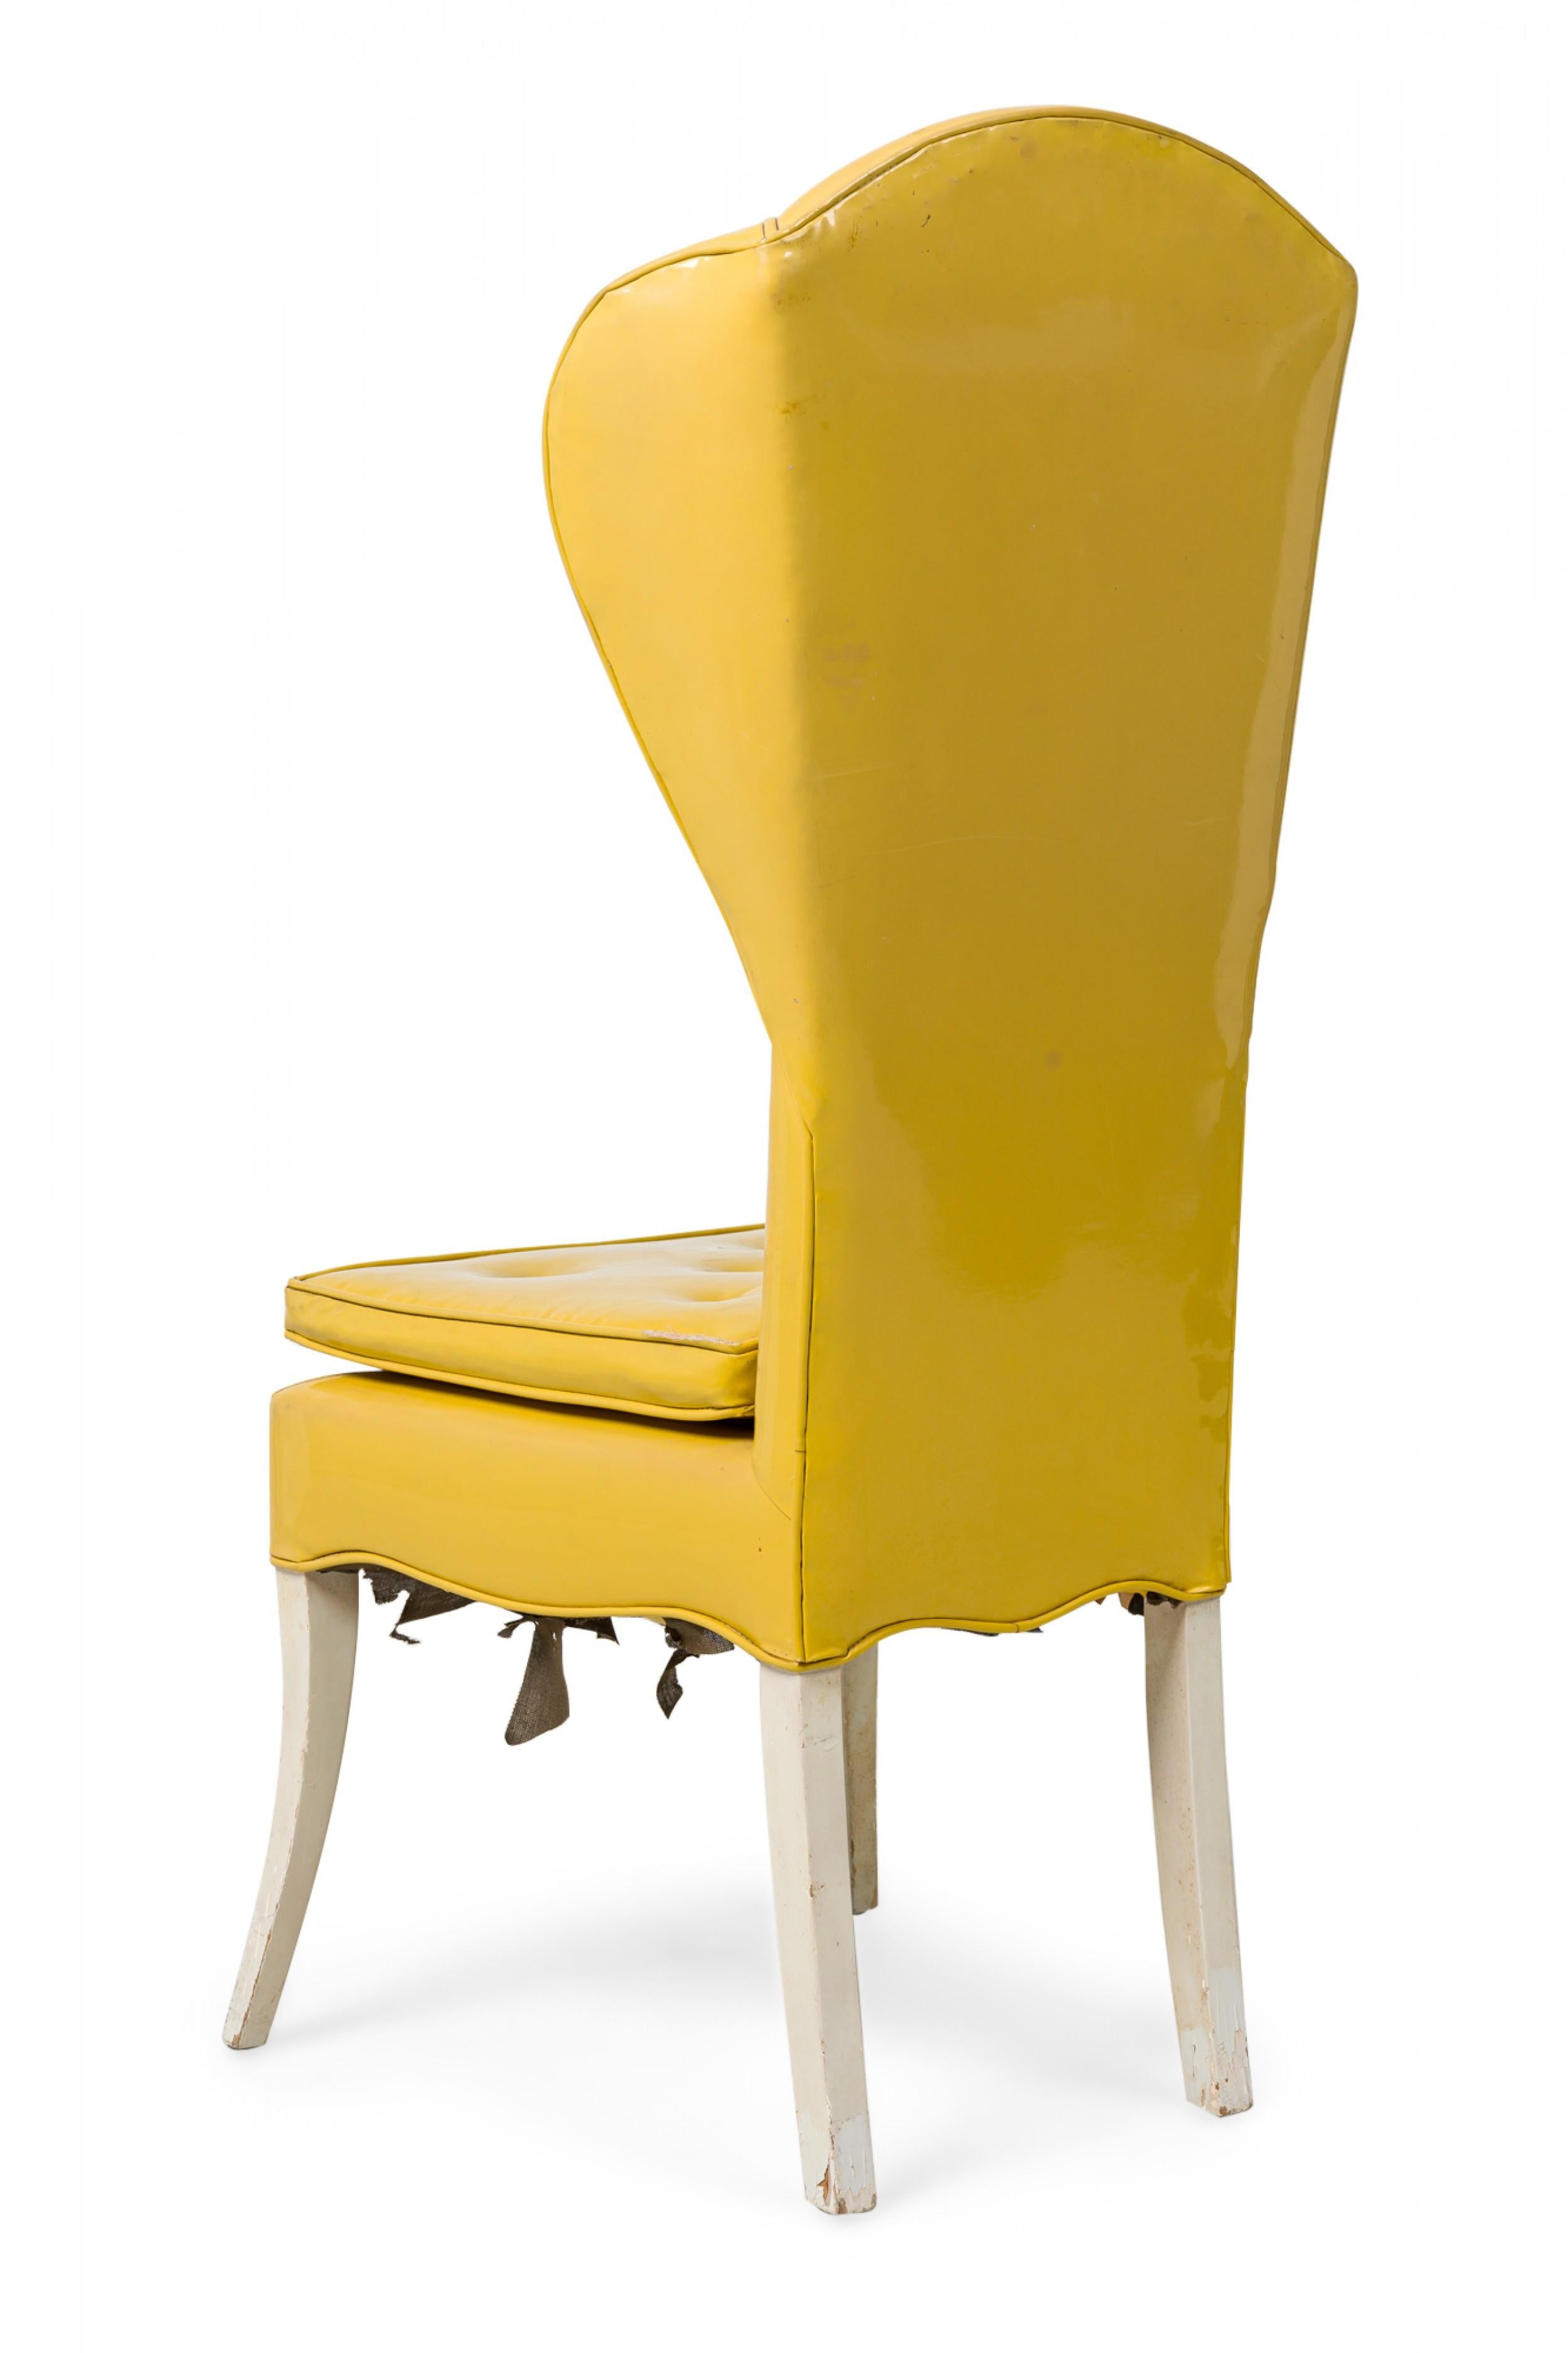 Mid-Century Modern Tommi Parzinger Midcentury American Yellow Vinyl Upholstered Wing Chair For Sale